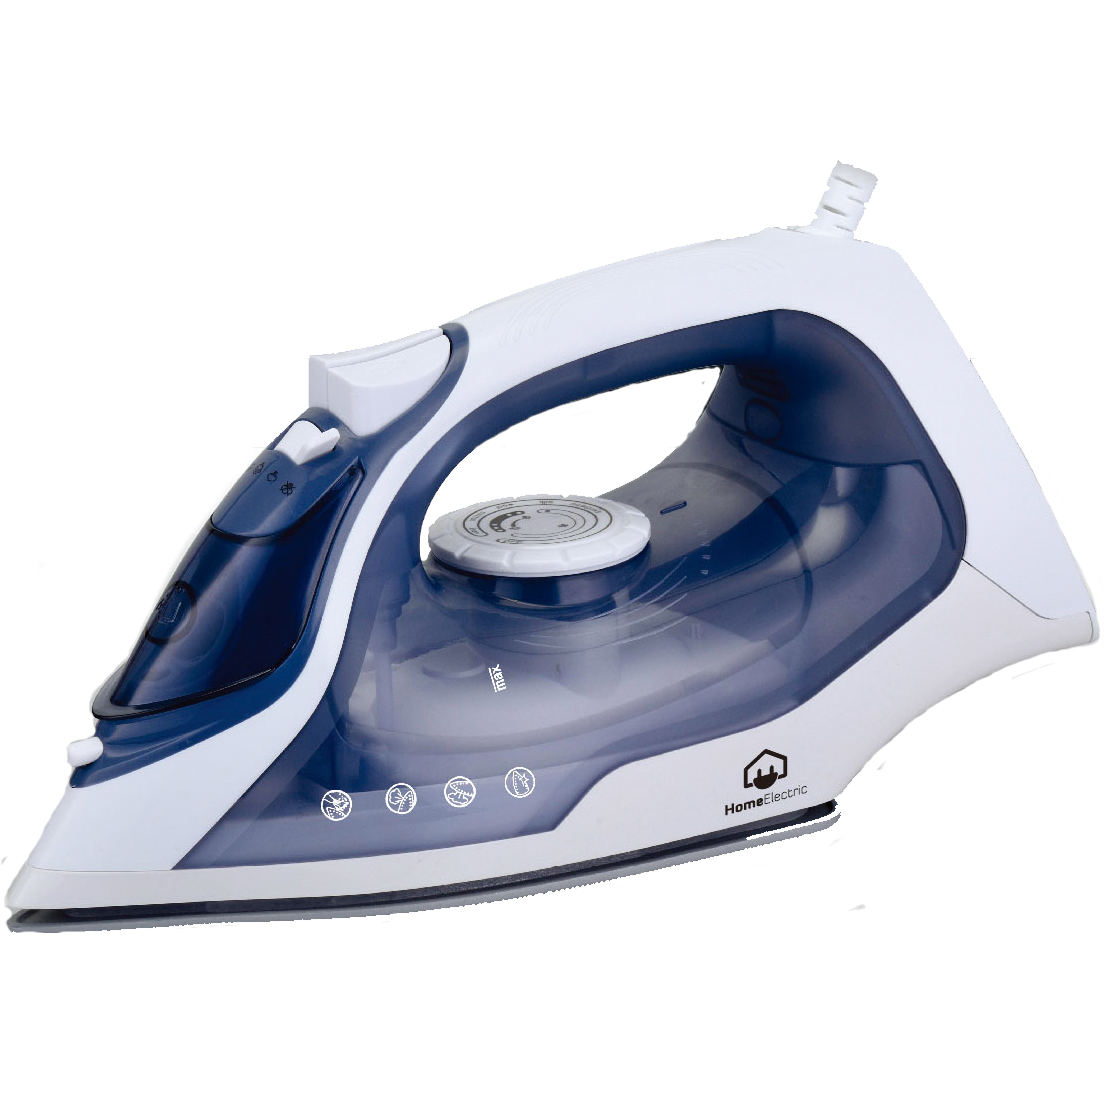 Home Electric 2000W Steam Iron HIT-78